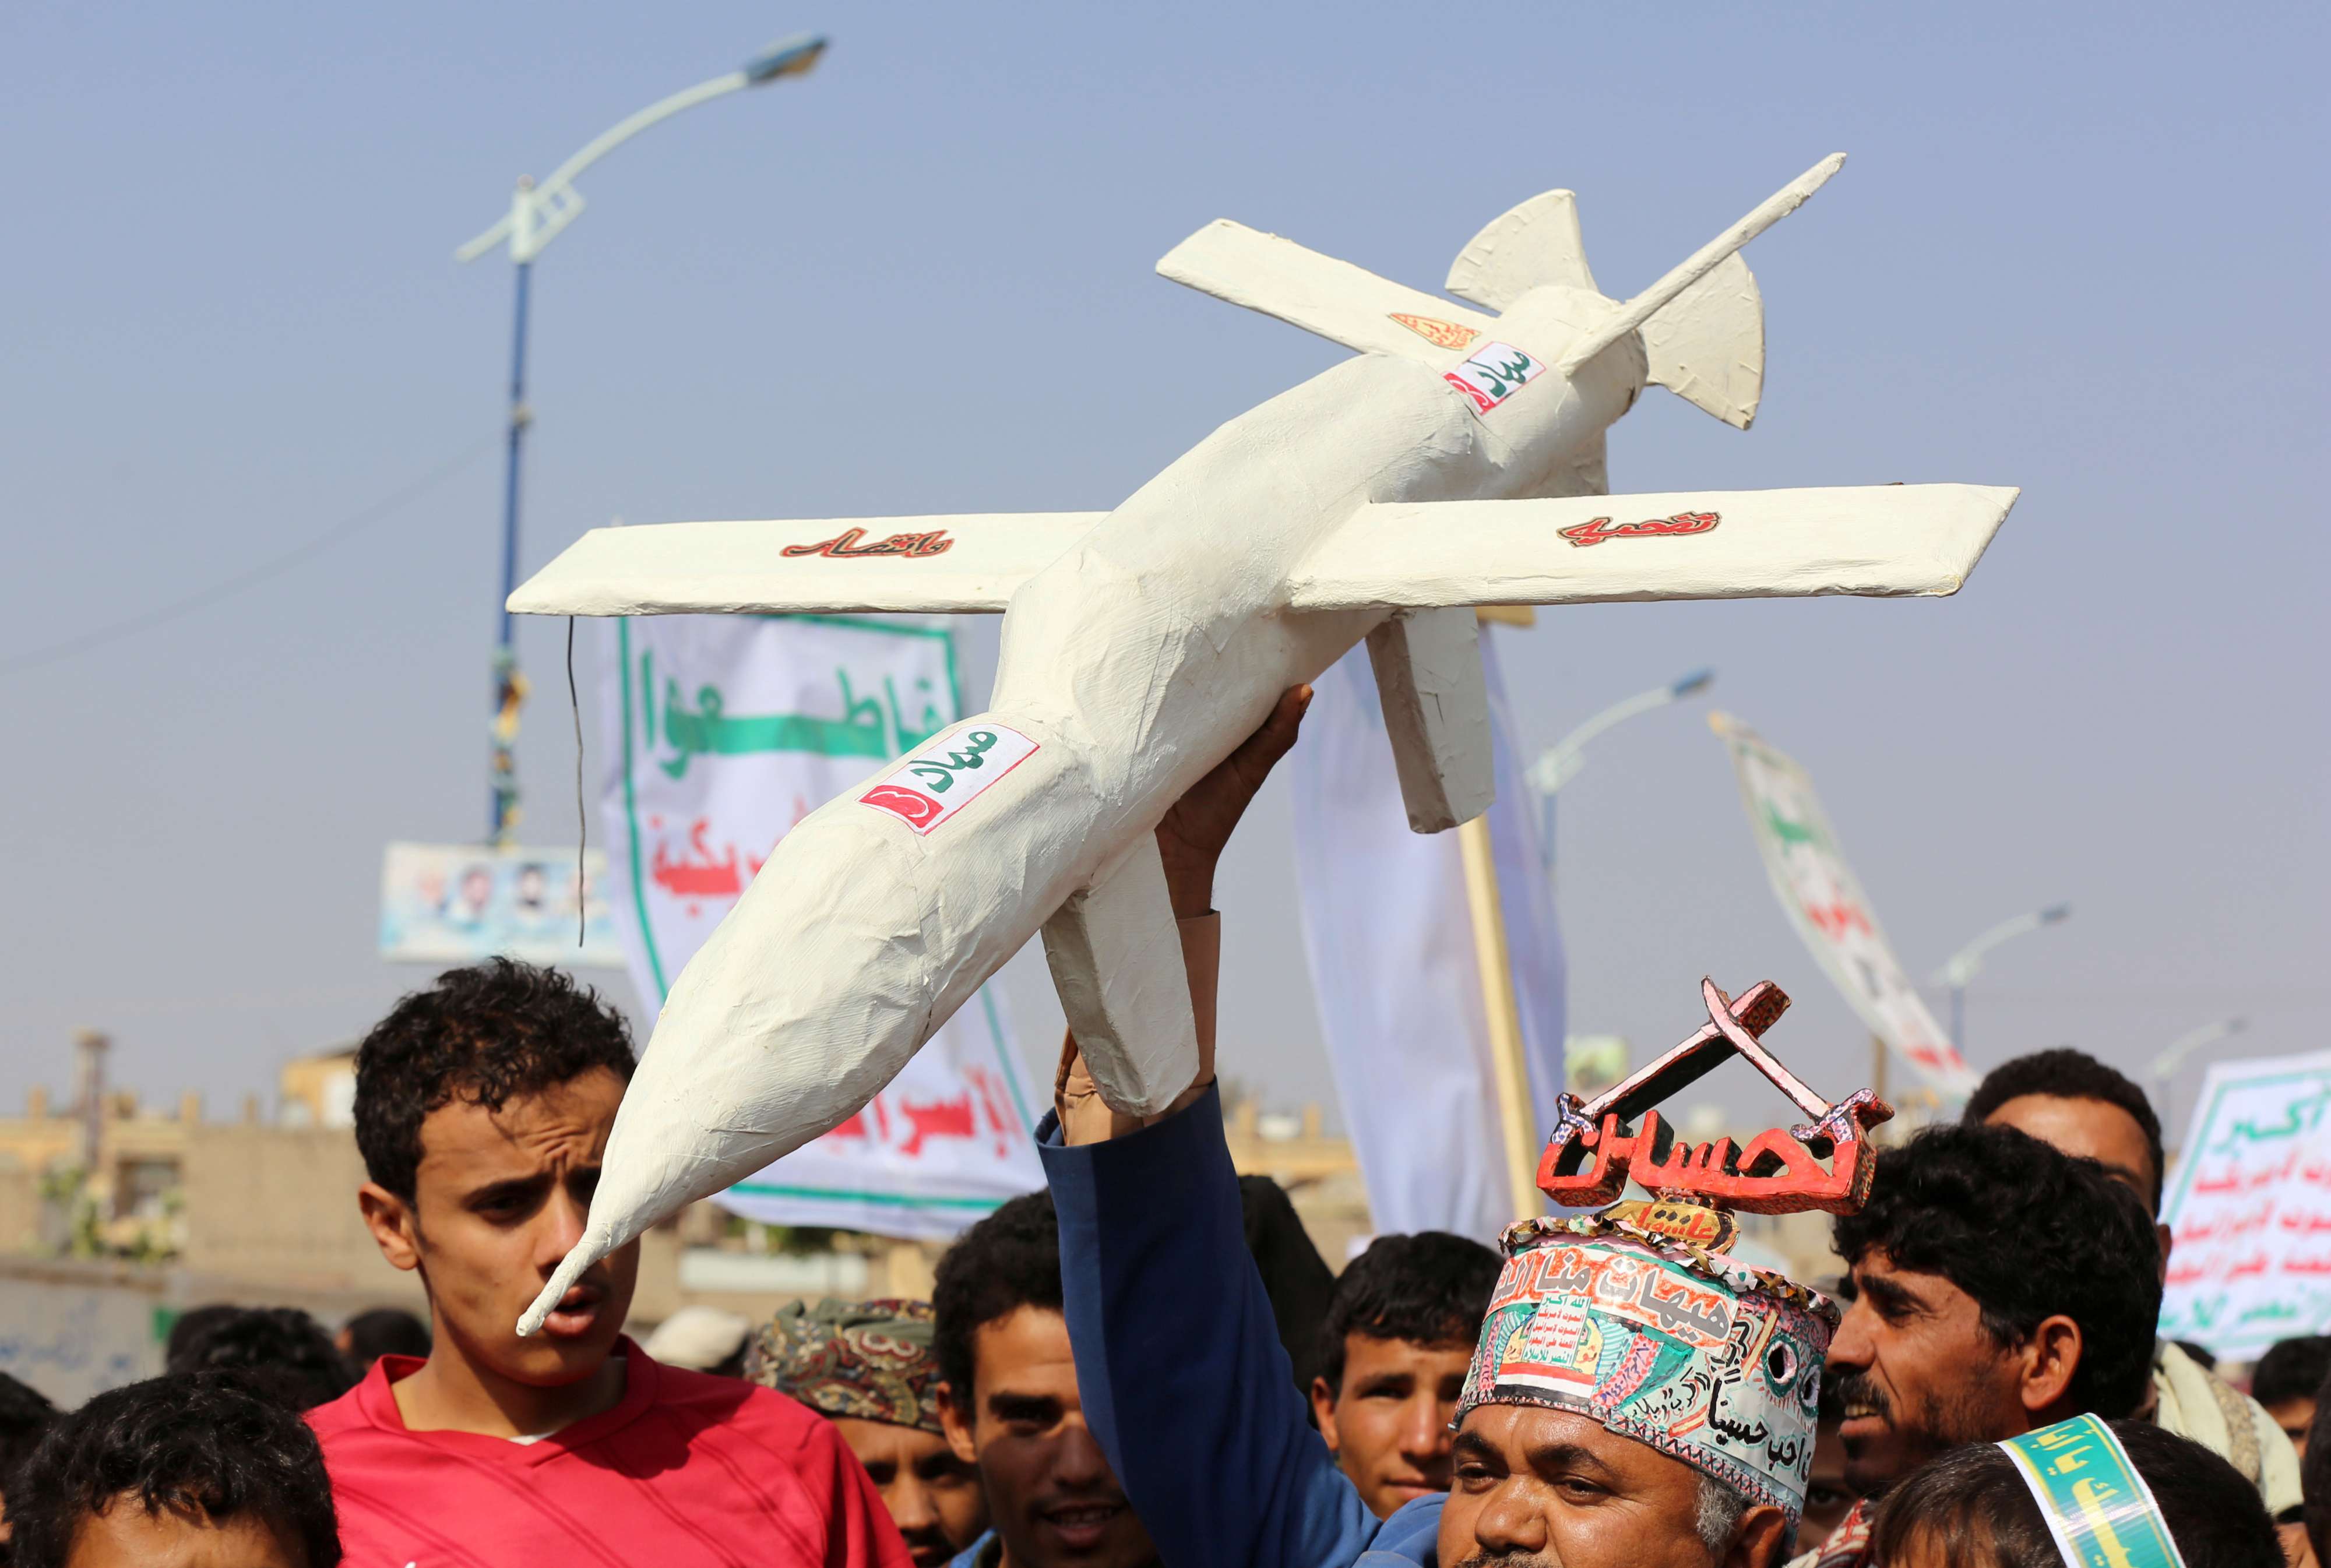 Followers of the Huthi movement carry a mock drone during a rally held to mark Ashura in Saada, Yemen